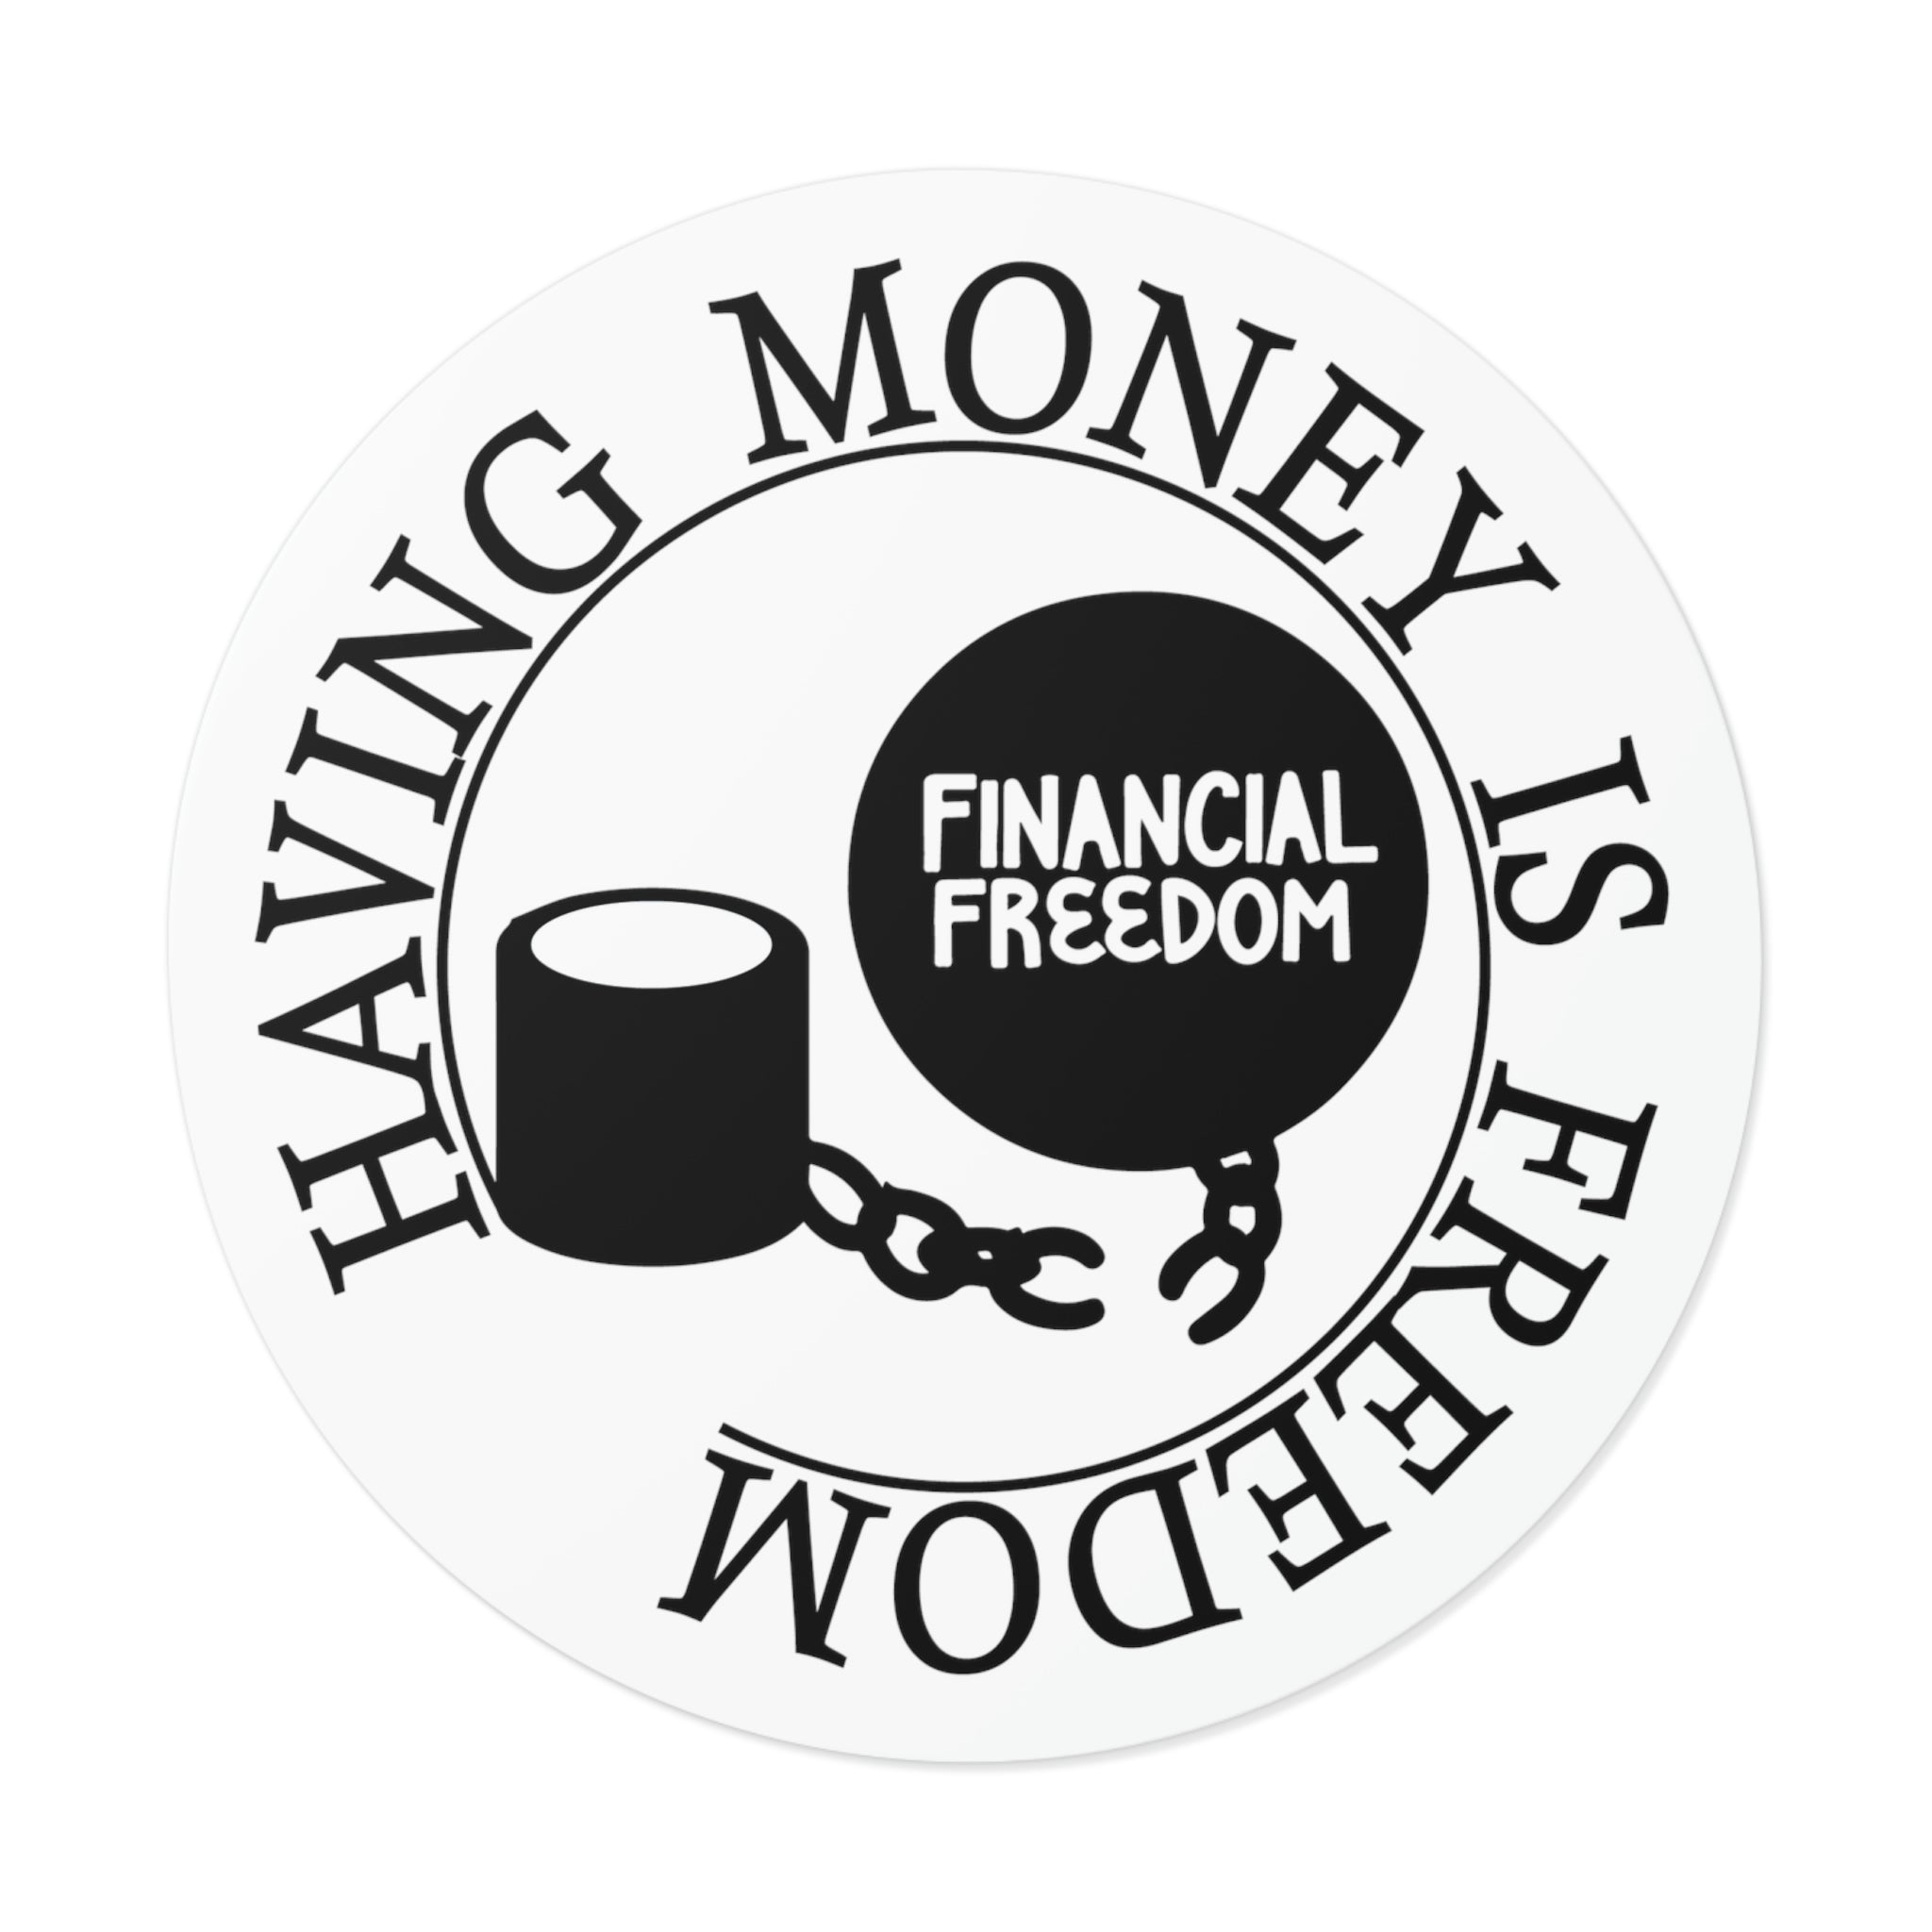 Having money is freedom sticker | Shop Financial freedom short quotes #size_4x4-inches